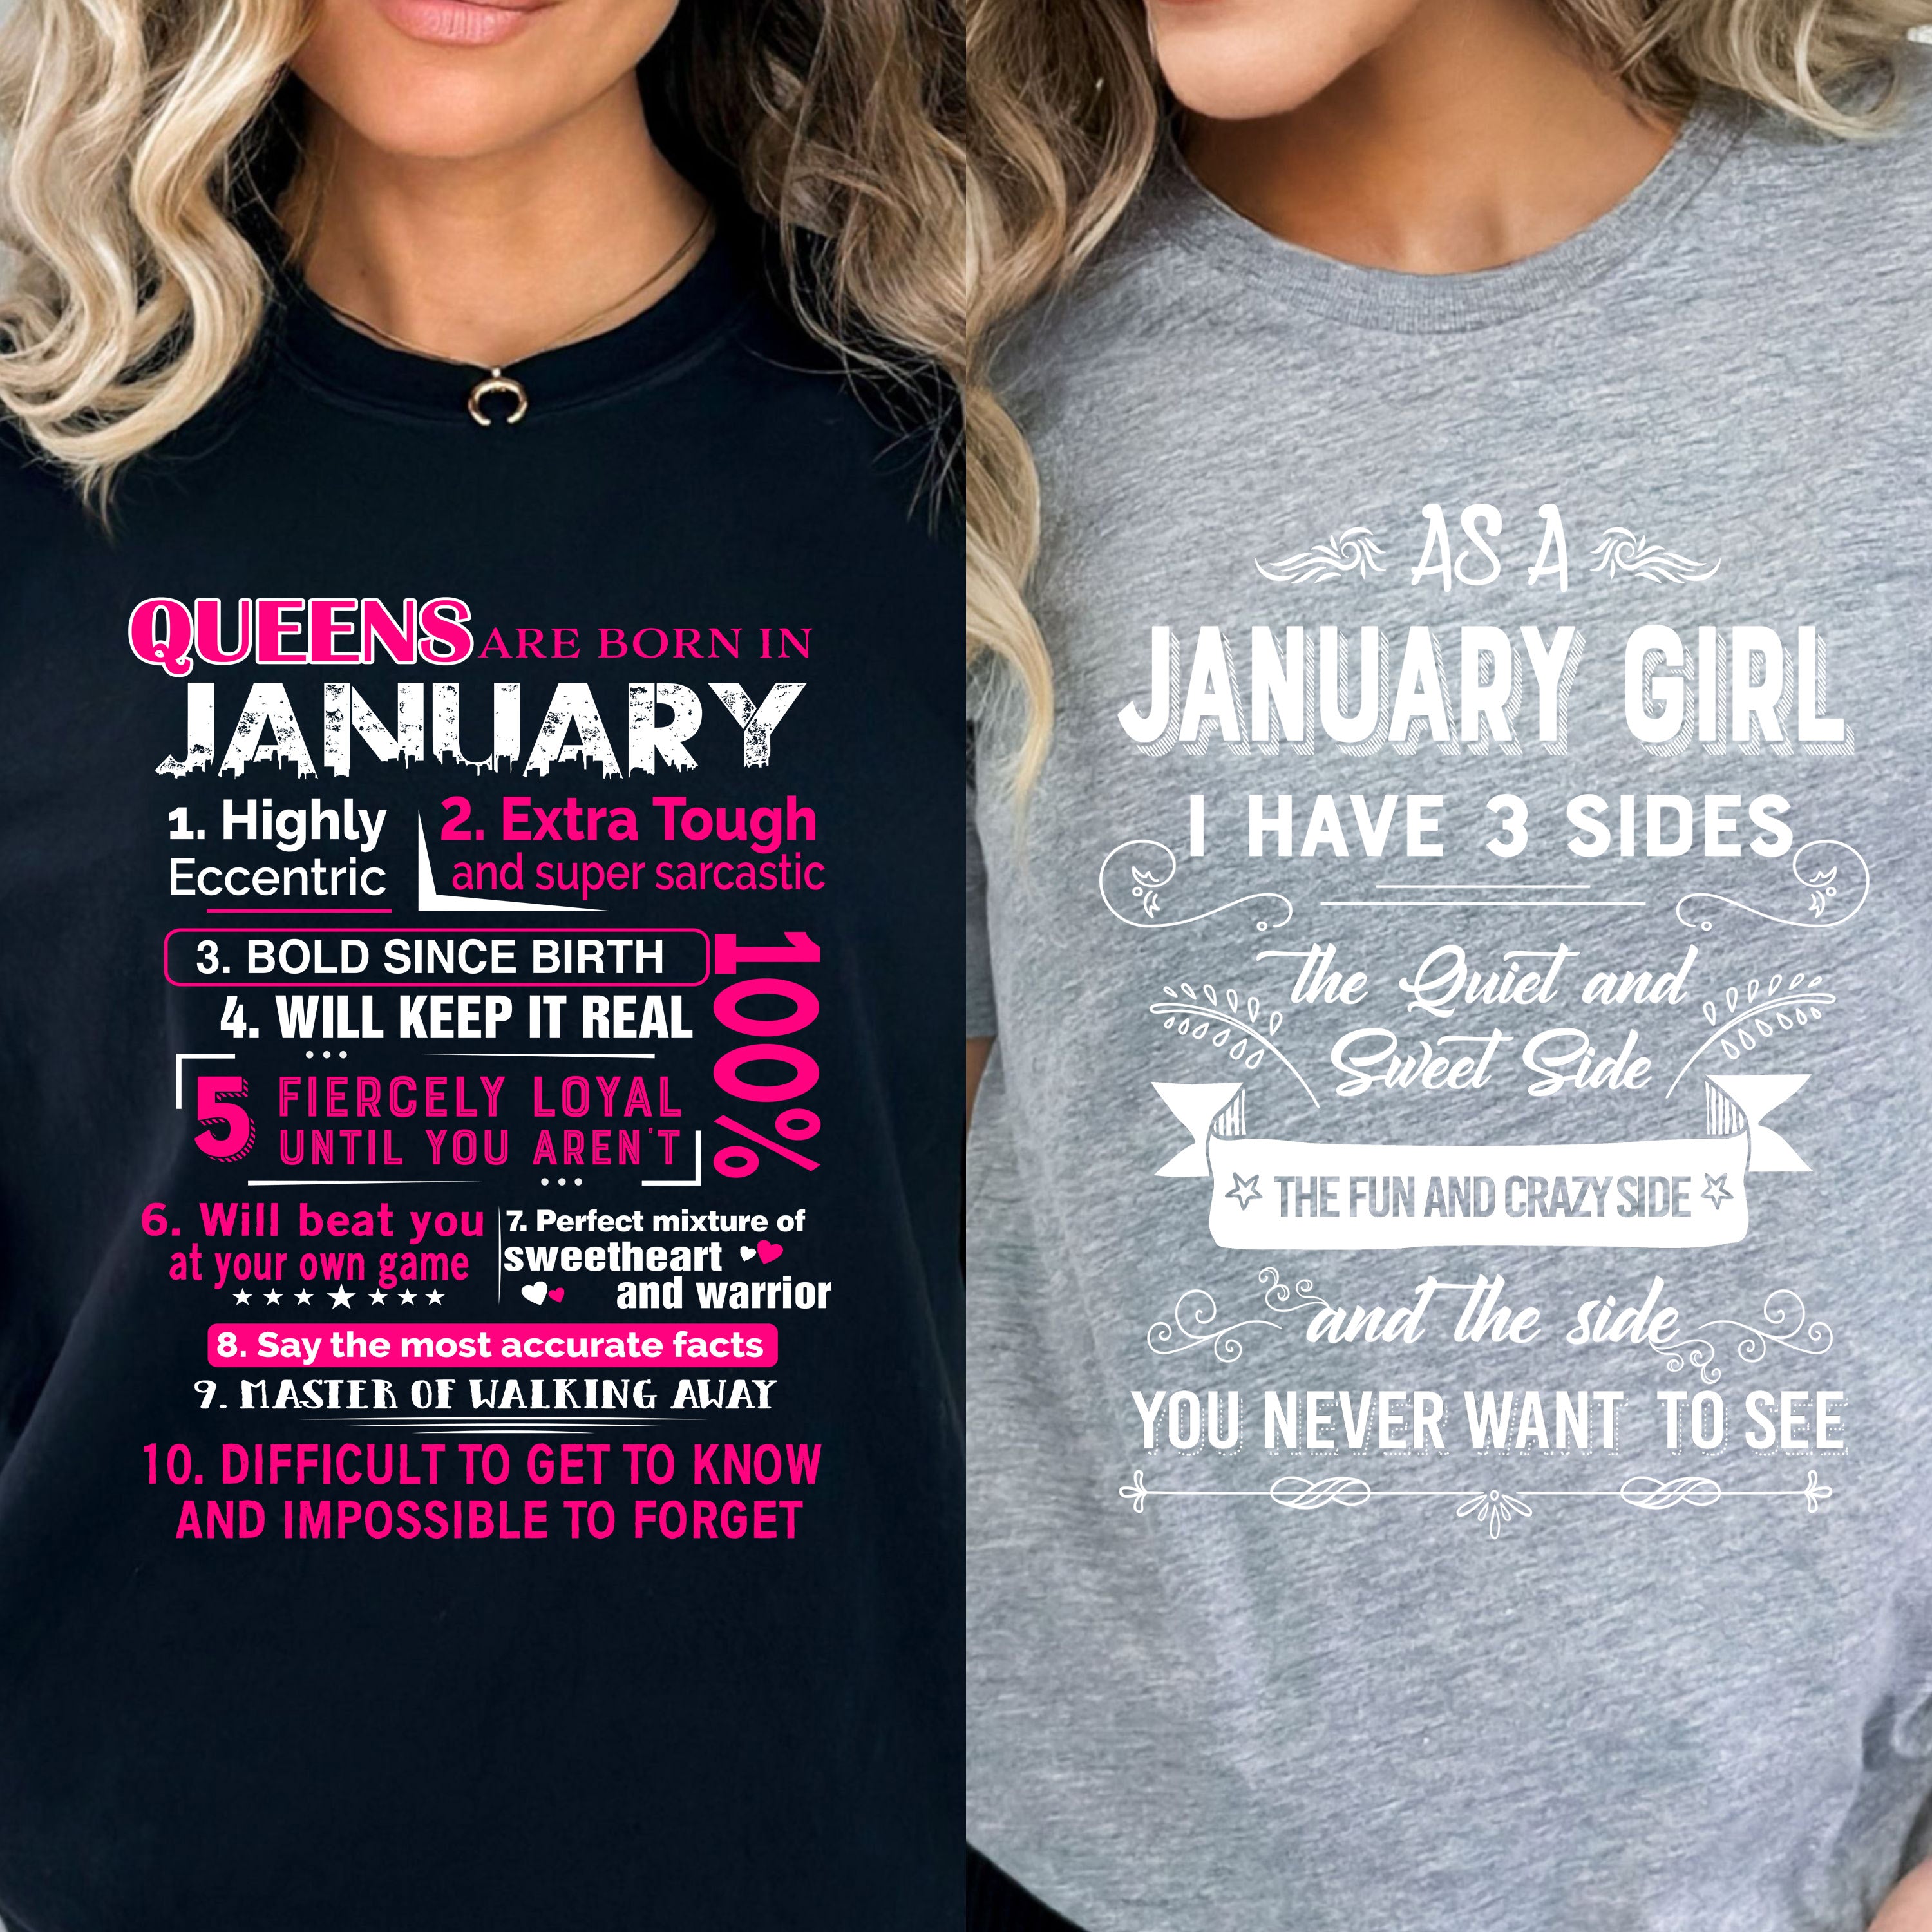 "January Queens + 3 Sides-Pack of 2",T-Shirt.